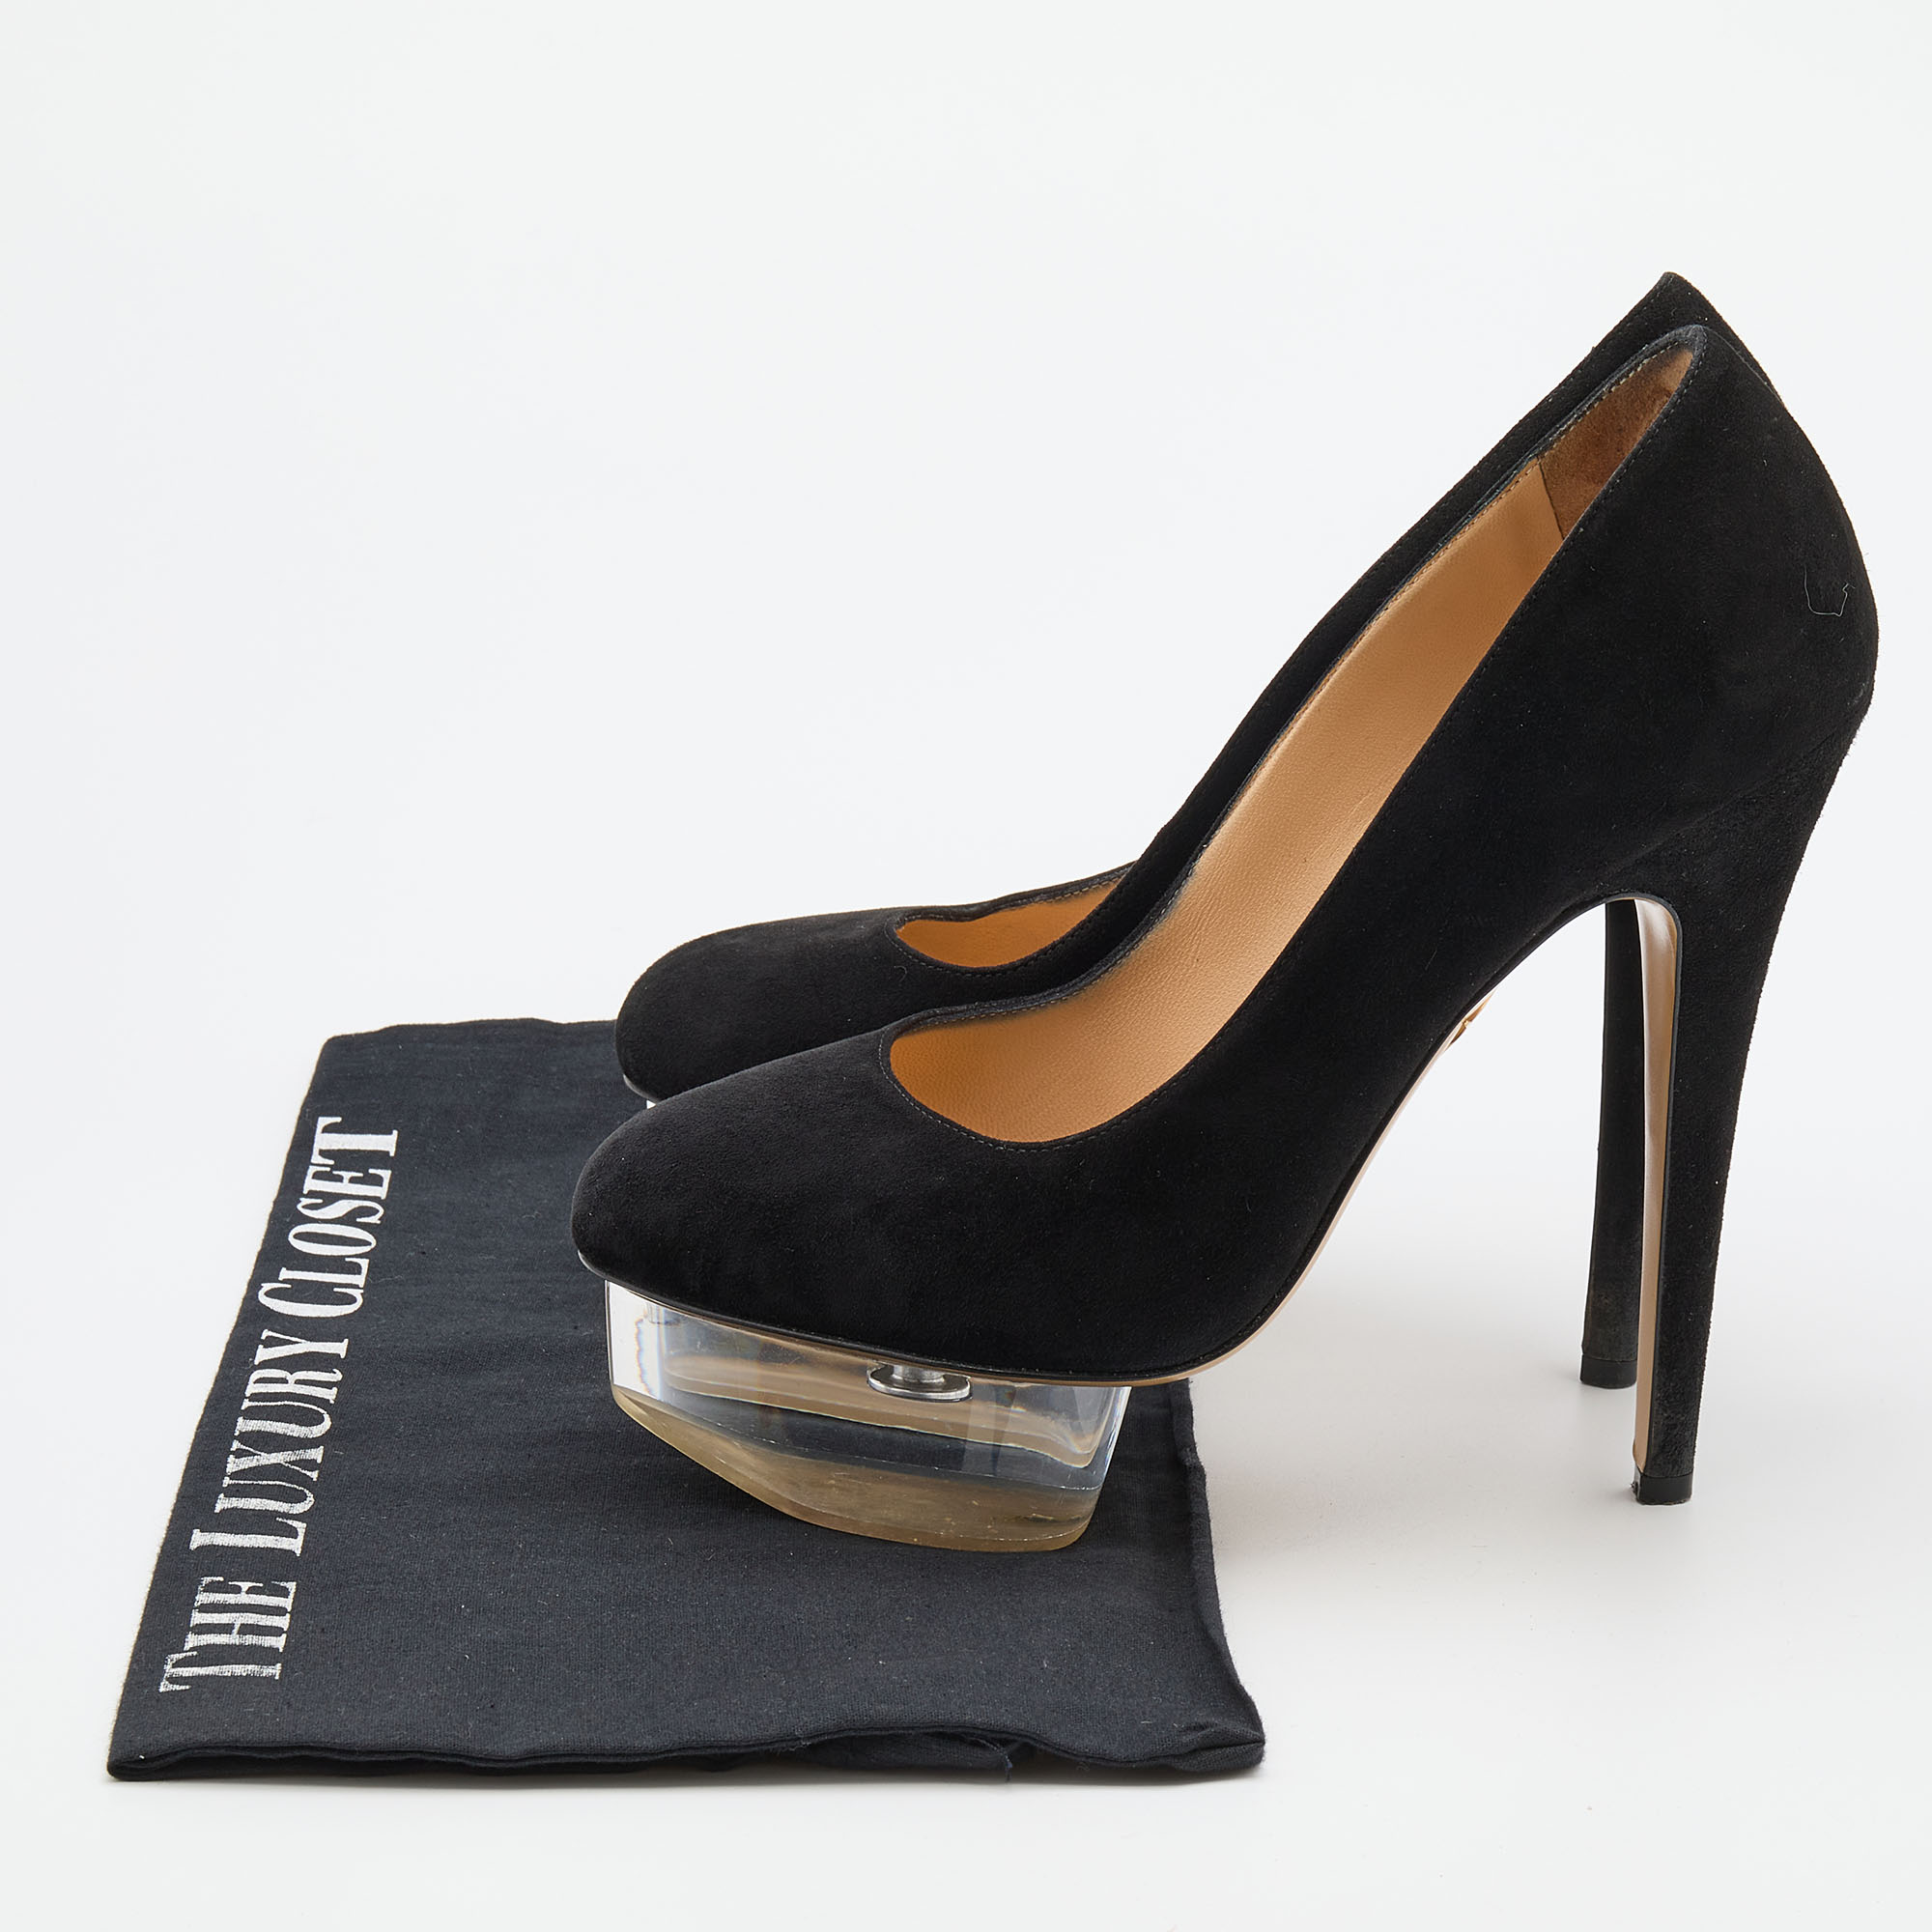 Charlotte Olympia Black Suede Dolly Platform Pumps Size 38